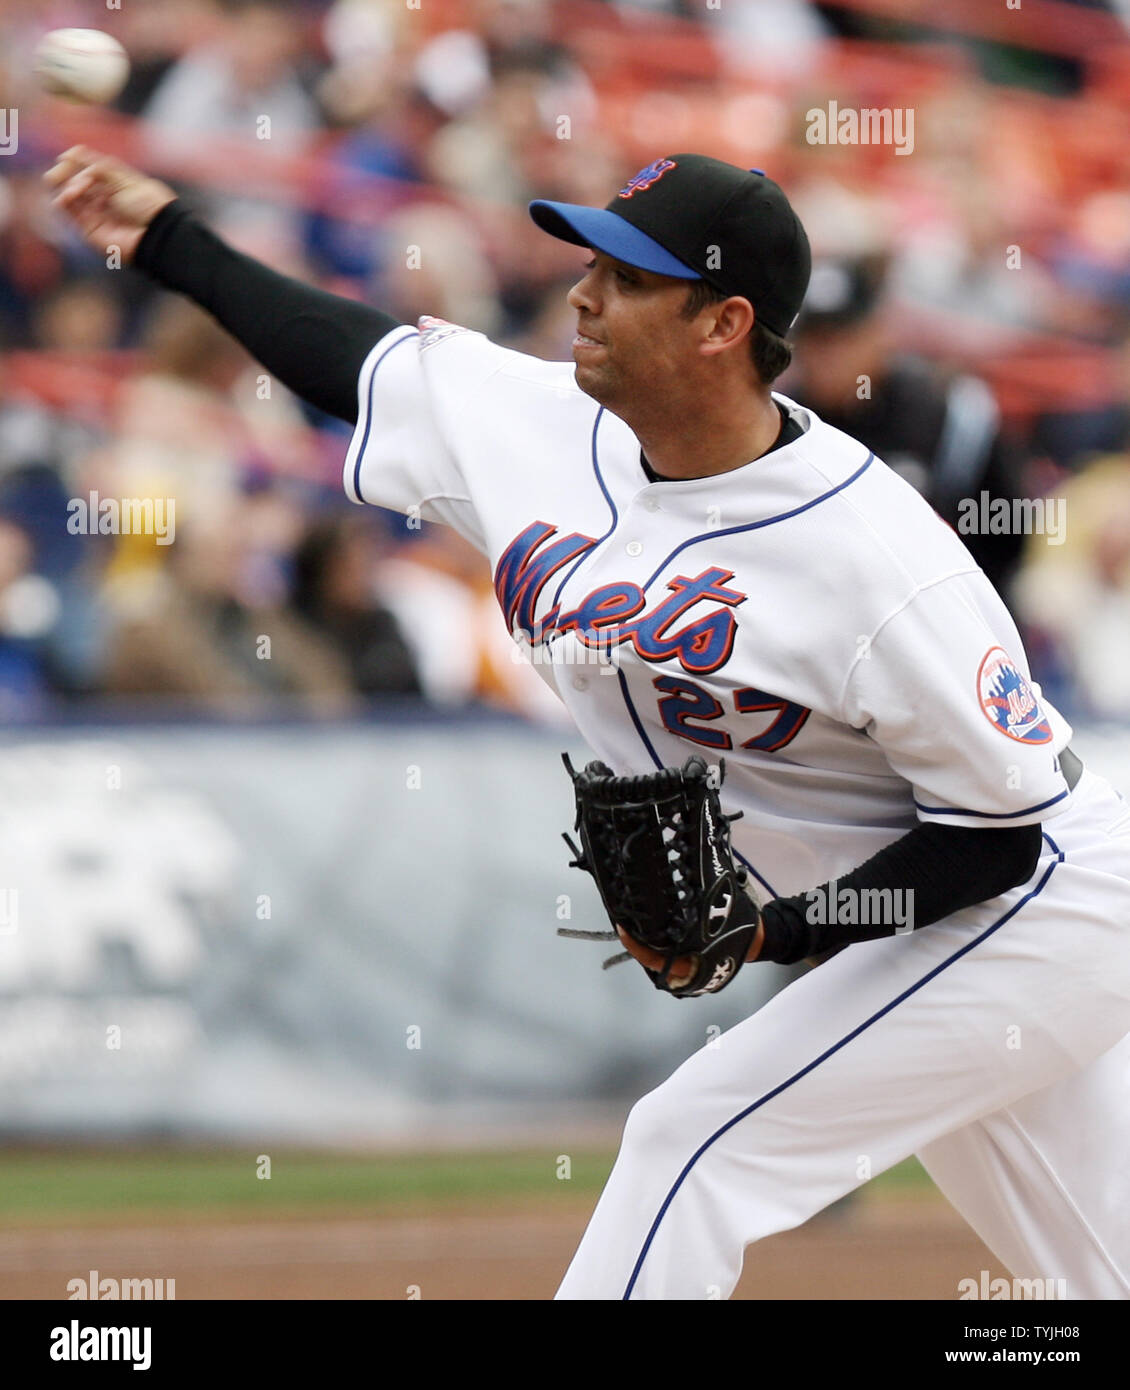 Former Met Nelson Figueroa came out of retirement to start for the